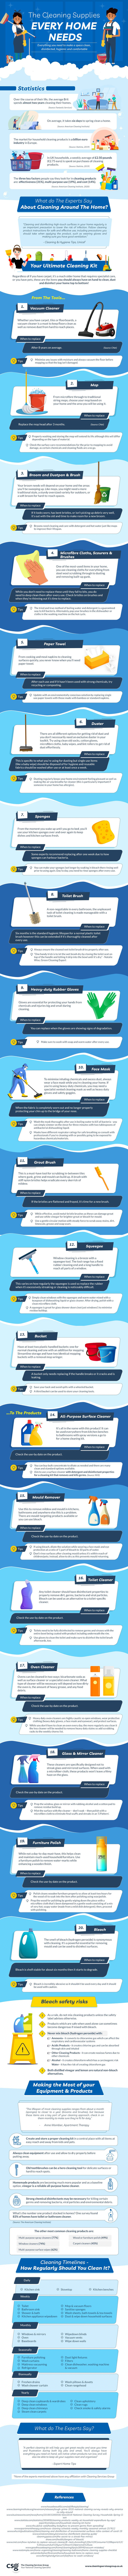 The Cleaning Supplies Every Home Needs Infographic